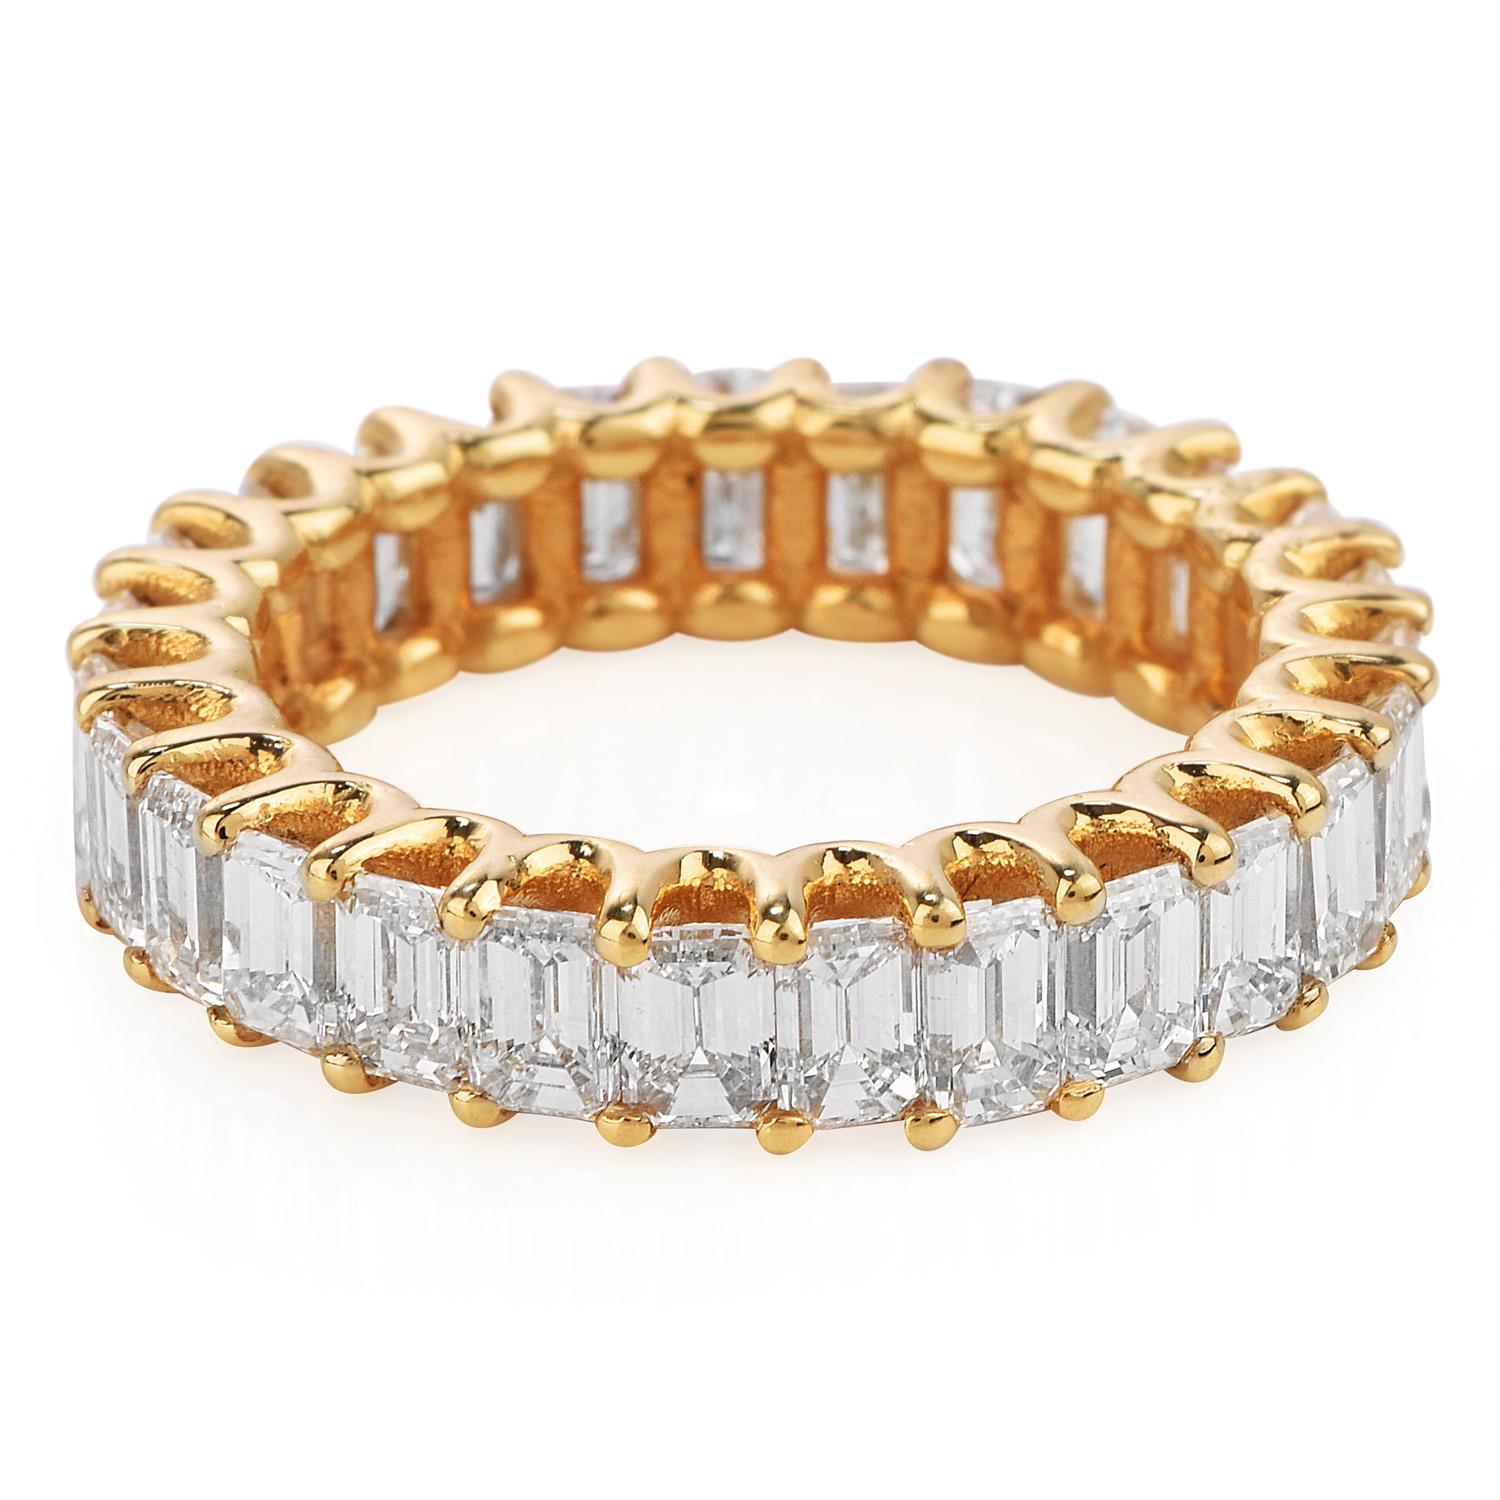 3.82 Carat Baguette Cut Diamond Yellow Gold Eternity Band Ring For Sale 1